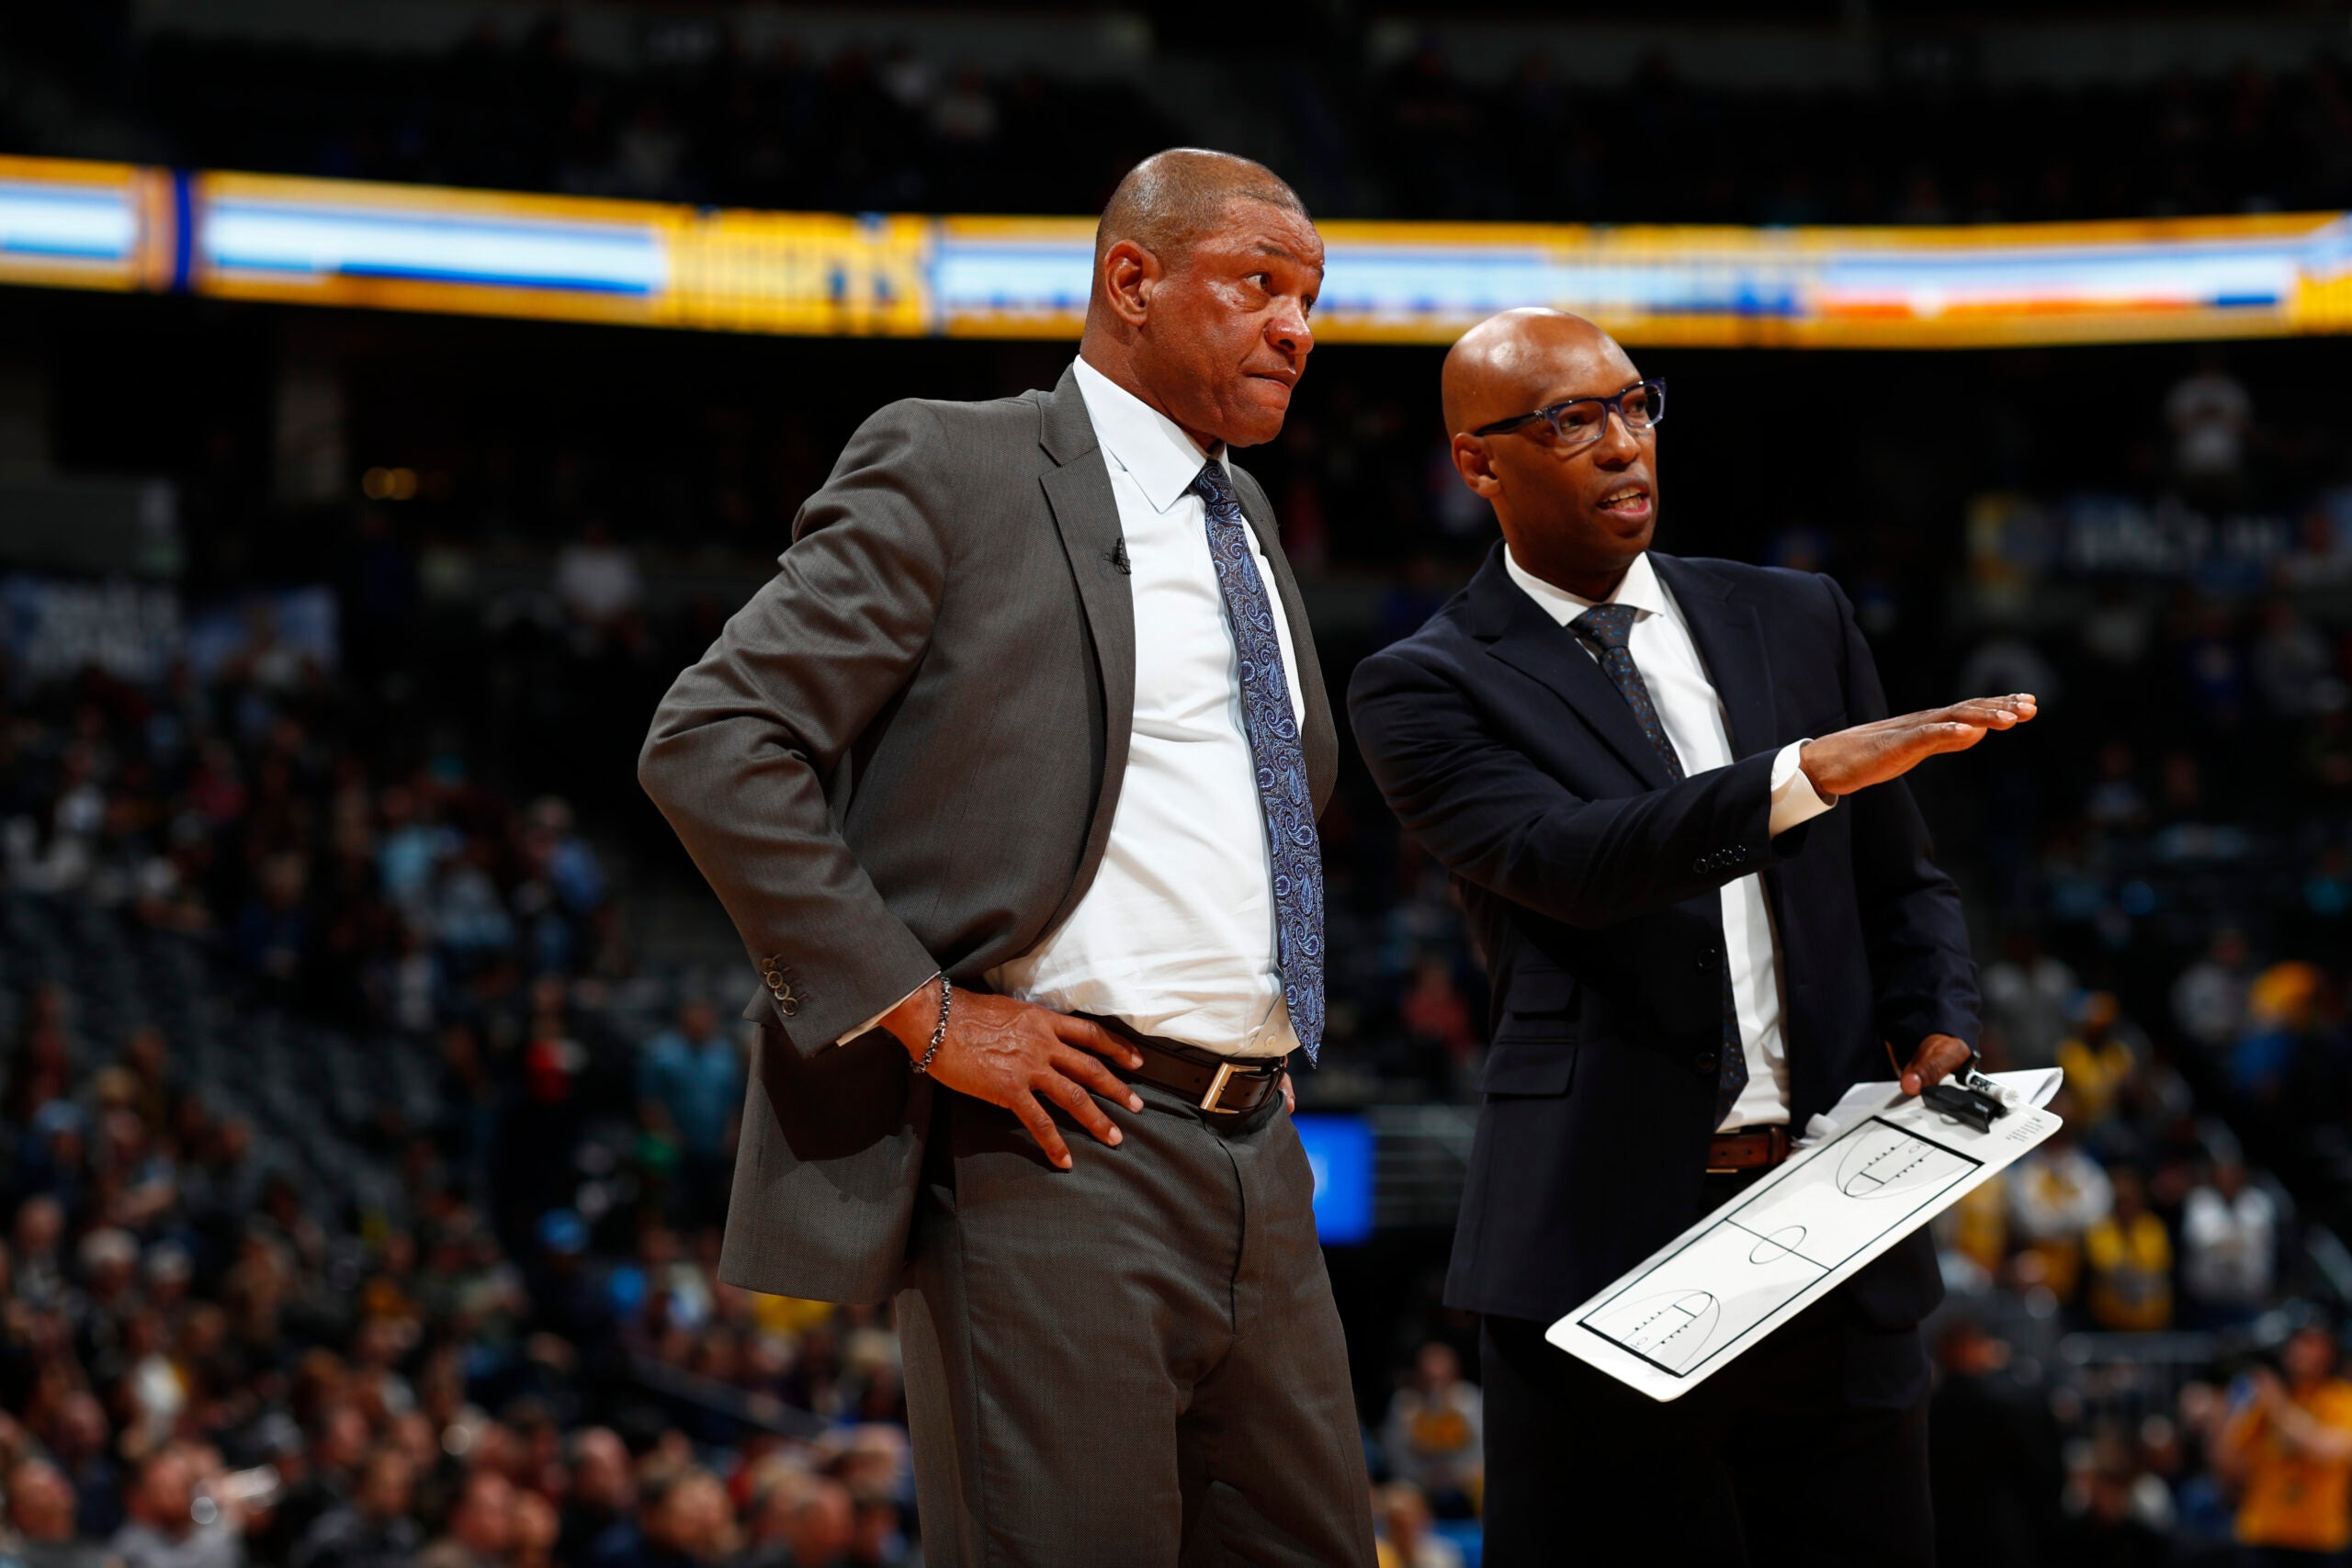 Los Angeles Clippers head coach Doc Rivers and assistant Sam Cassell in the second half of an NBA basketball game Tuesday, Feb. 27, 2018, in Denver. The Clippers prevailed 122-120.